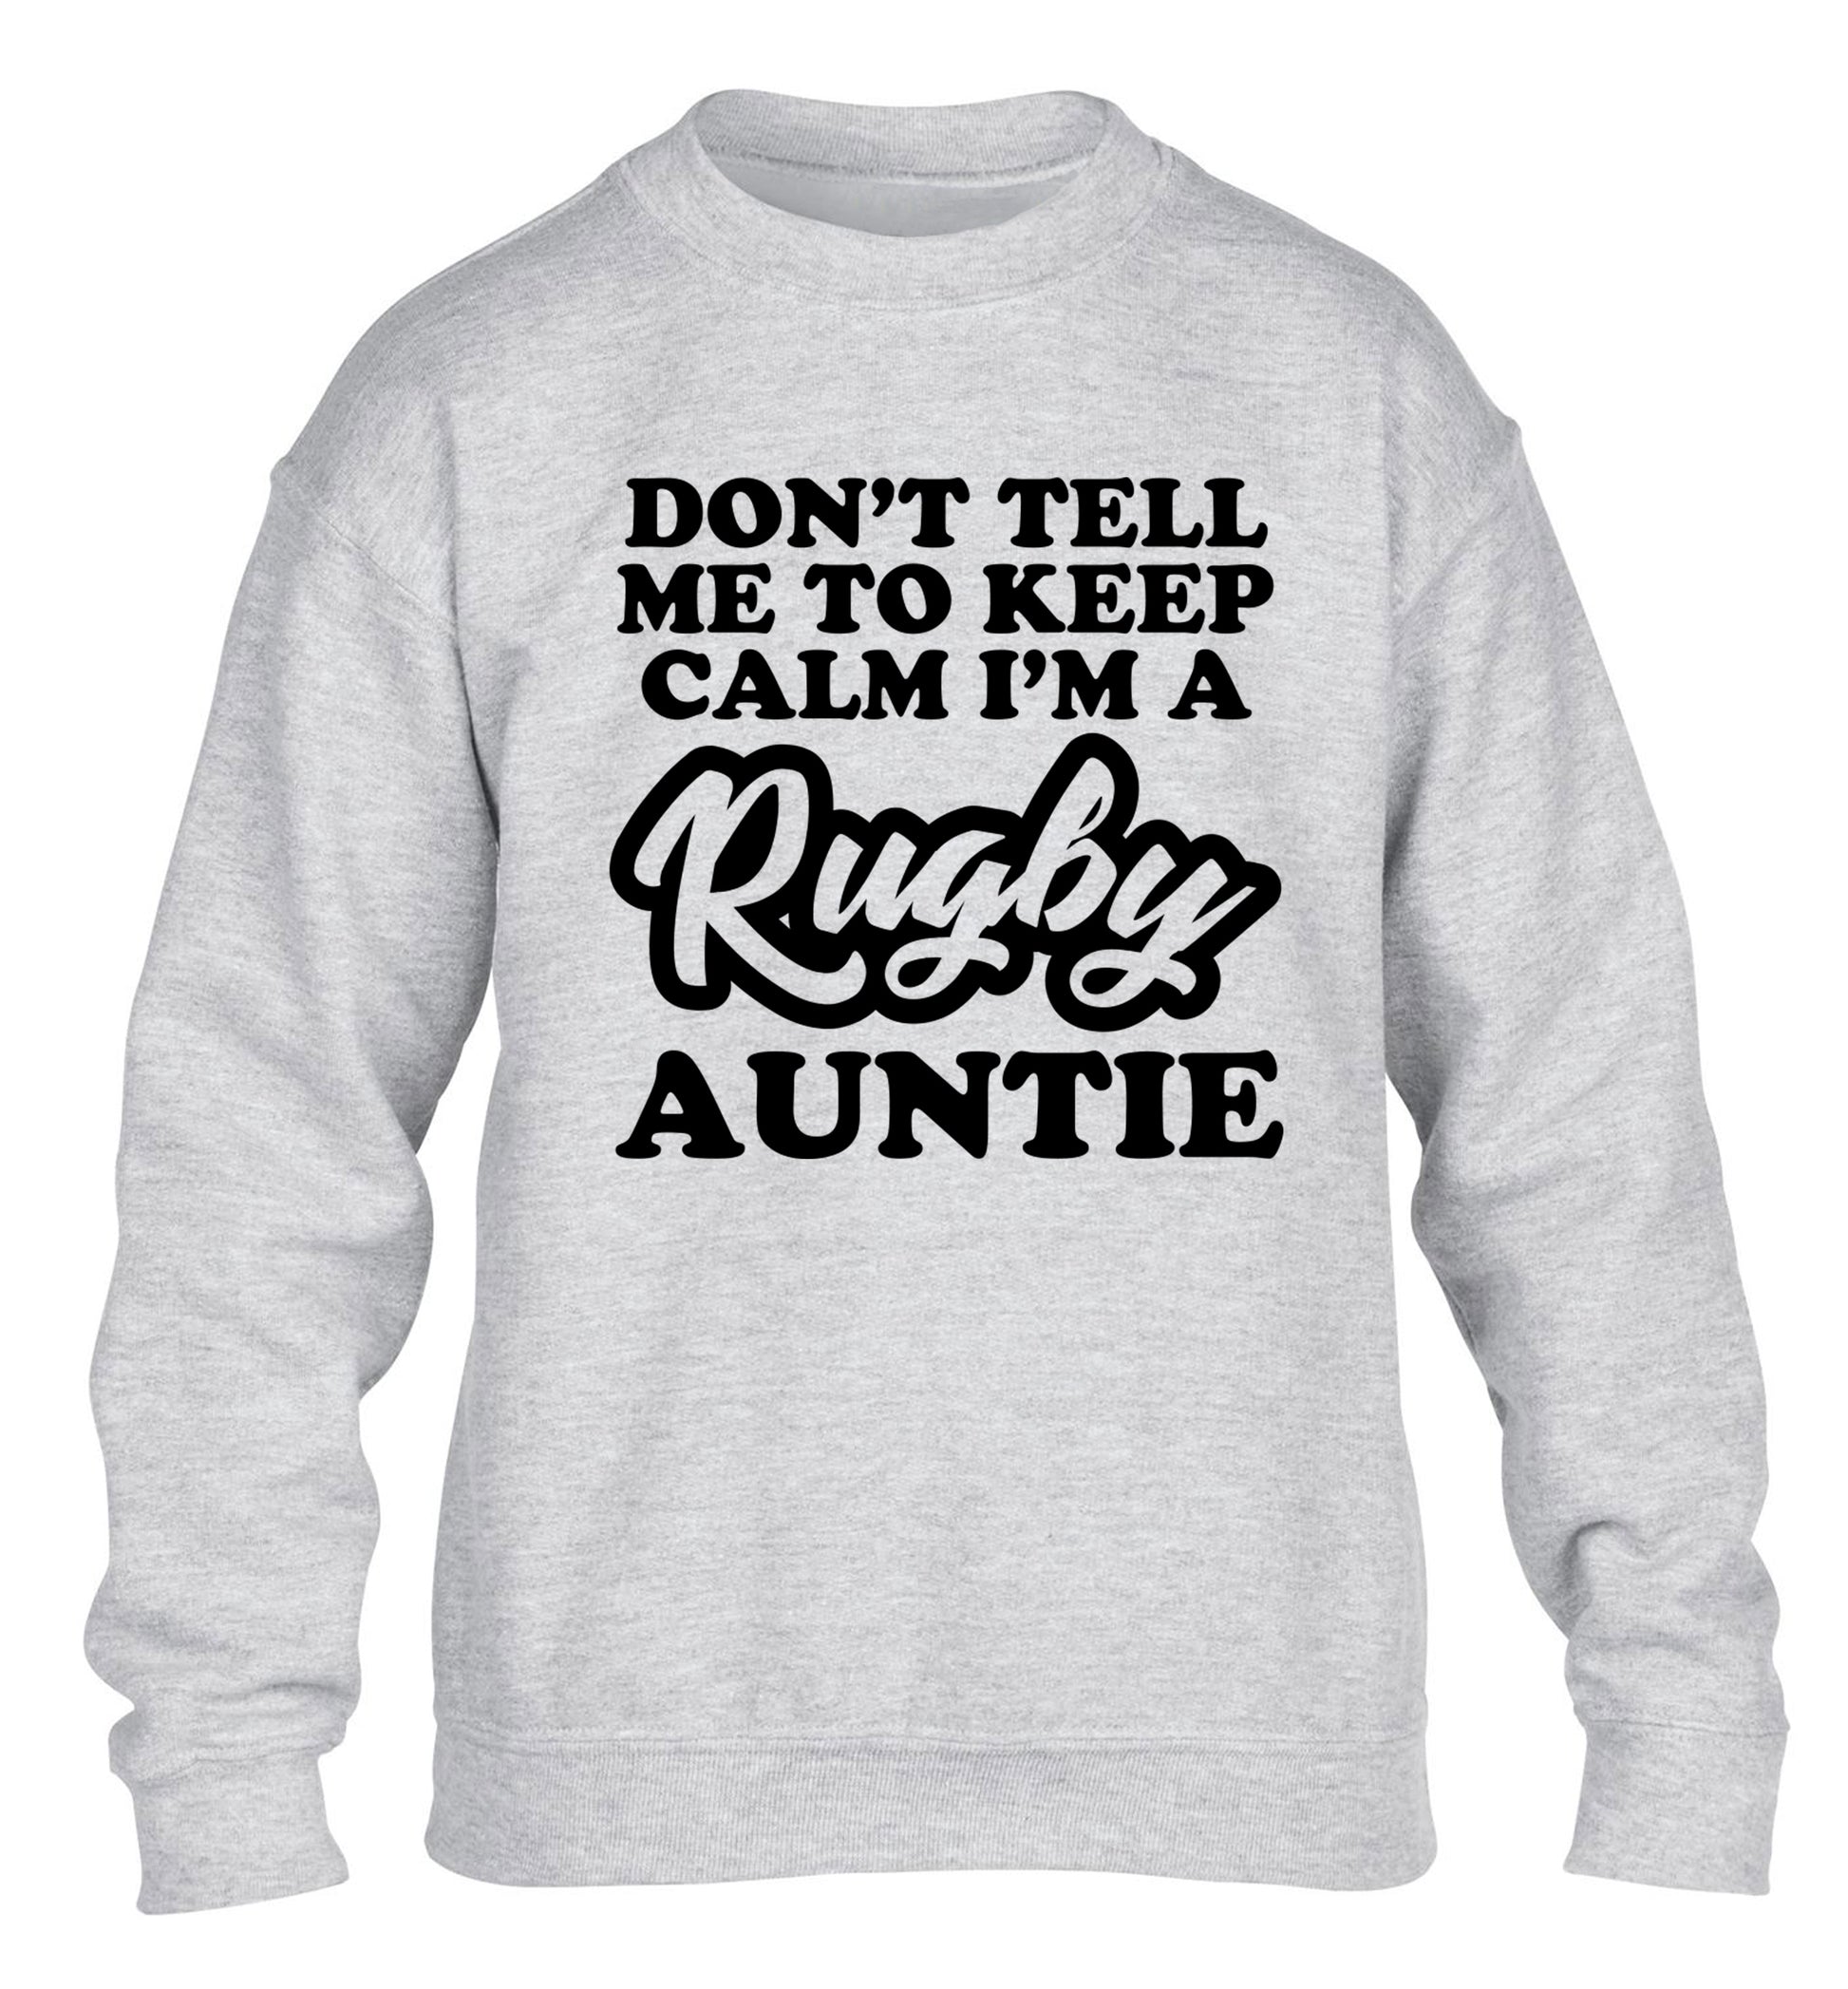 Don't tell me keep calm I'm a rugby auntie children's grey sweater 12-13 Years